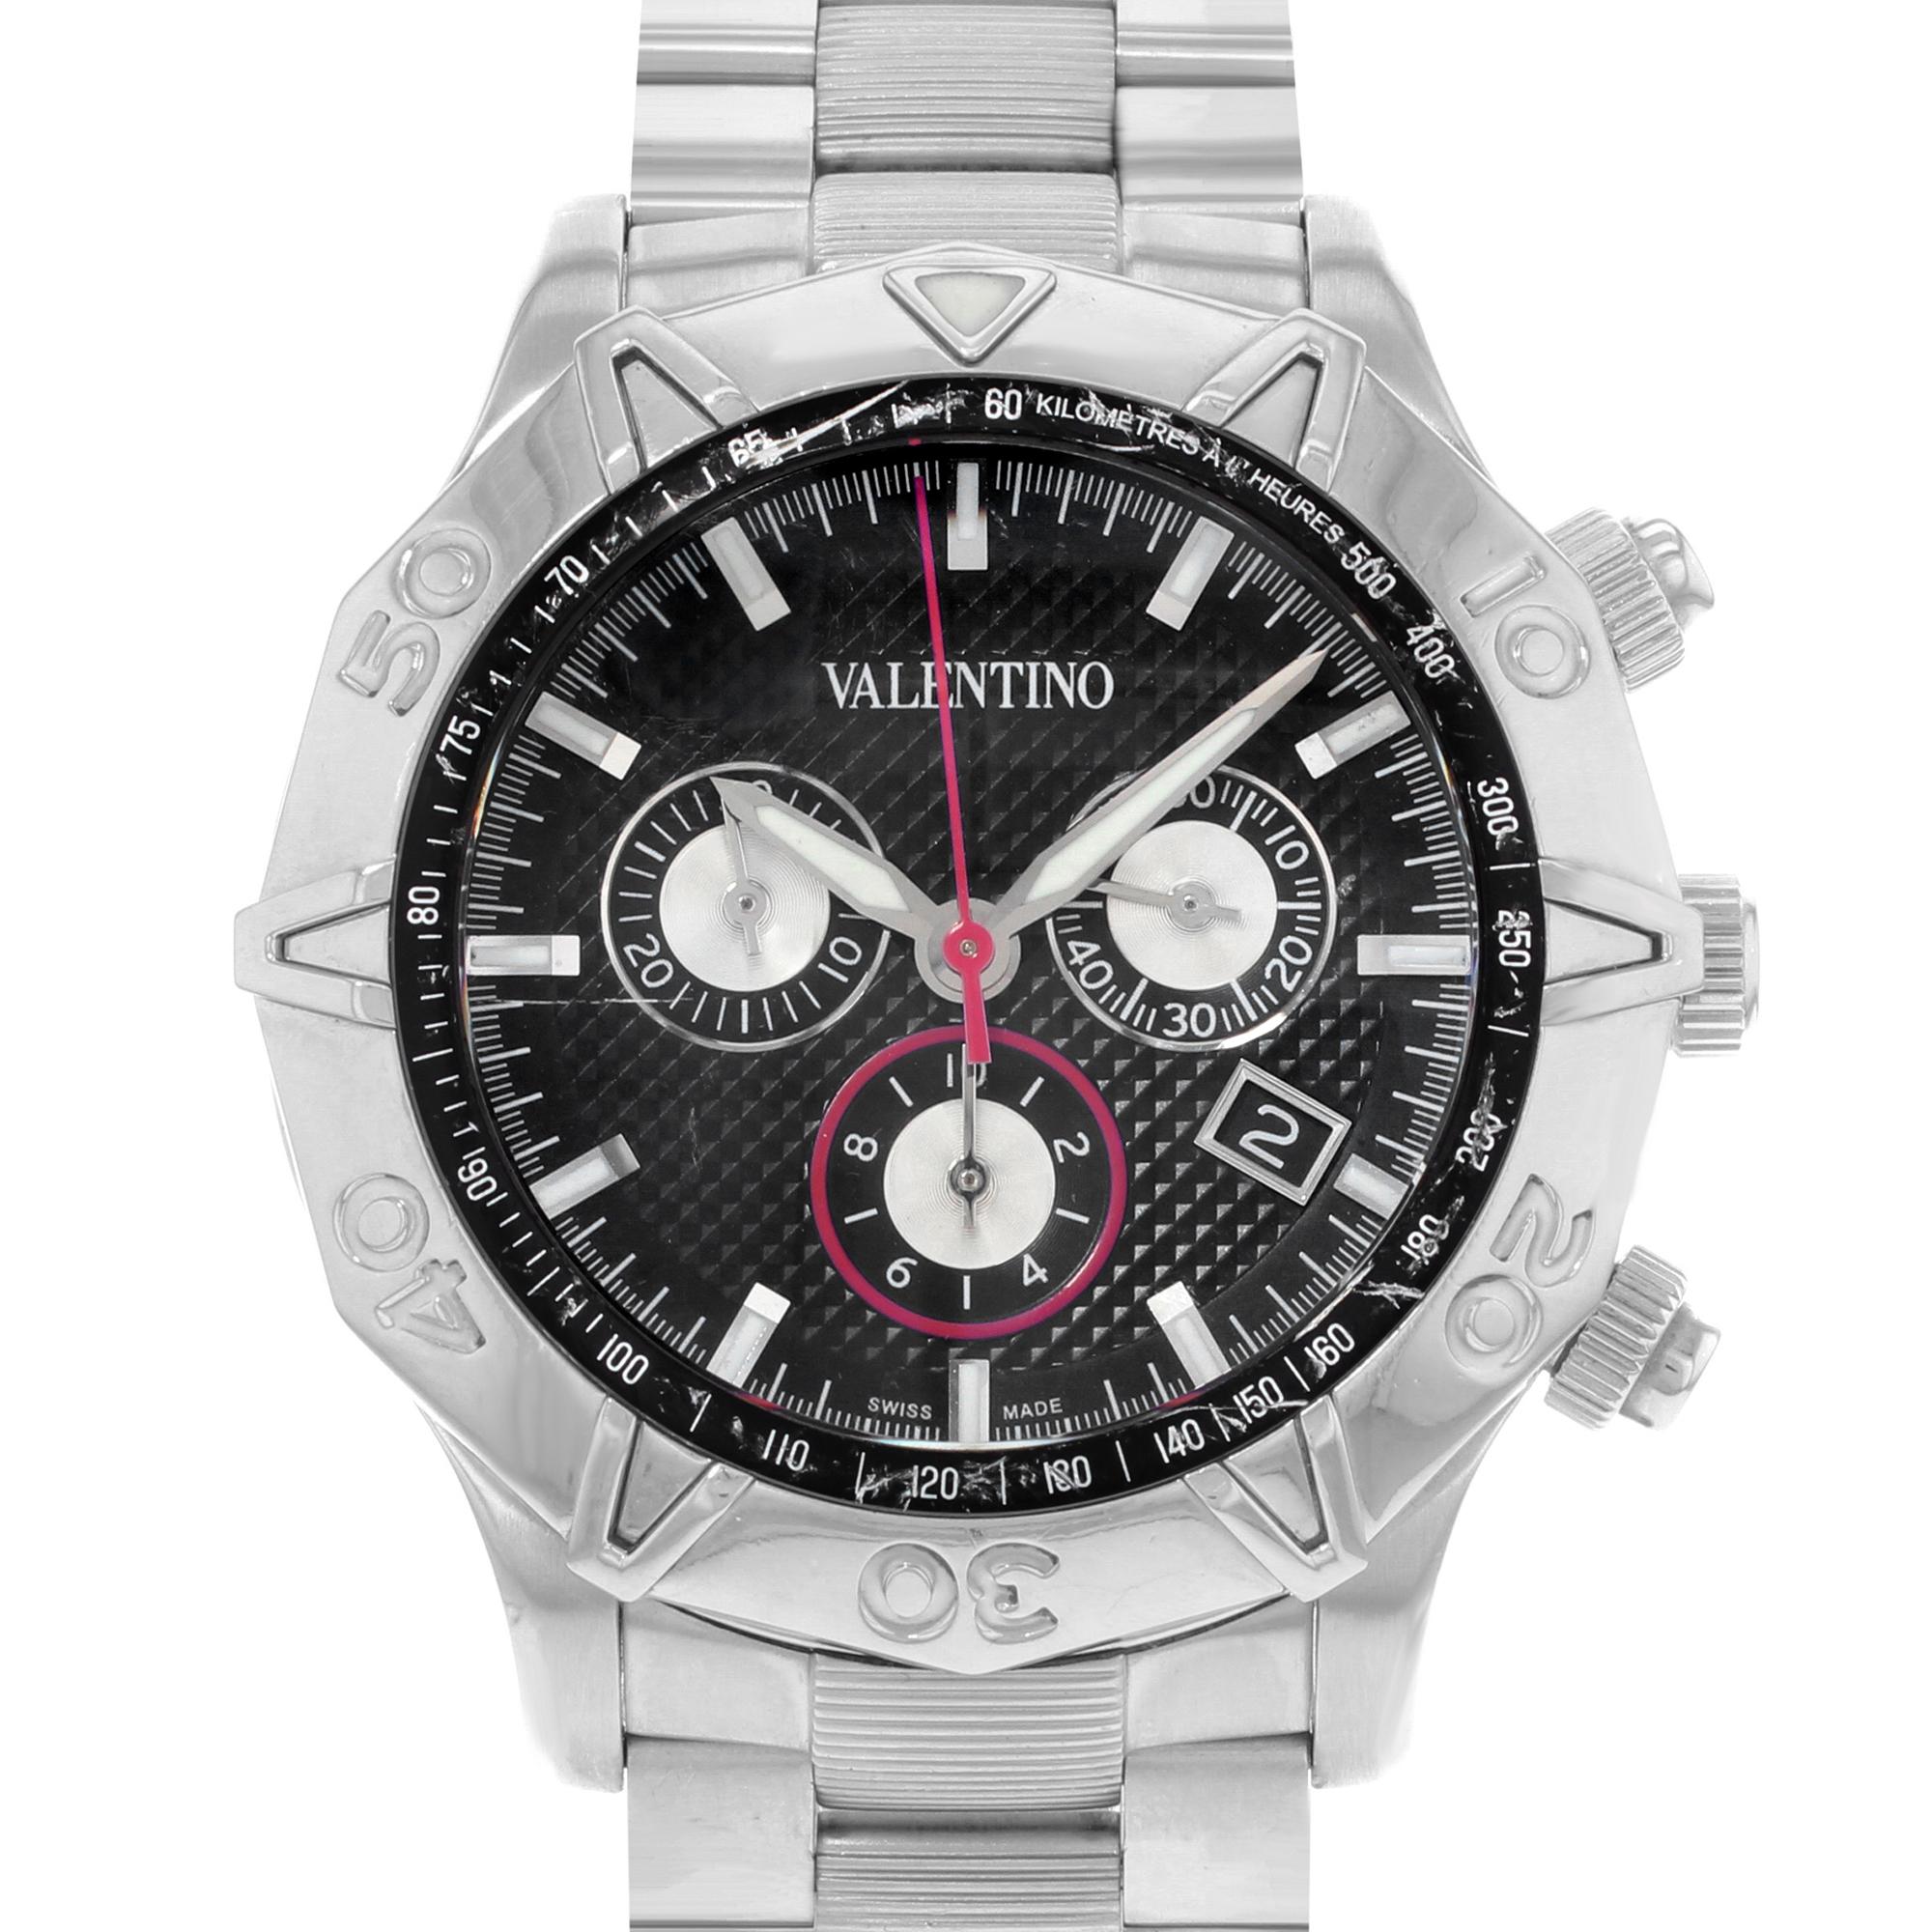 This pre-owned Valentino Limited Edition V40LCQ9909-S099 is a beautiful men's timepiece that is powered by a quartz movement which is cased in a stainless steel case. It has a round shape face, chronograph, date, small seconds subdial dial and has